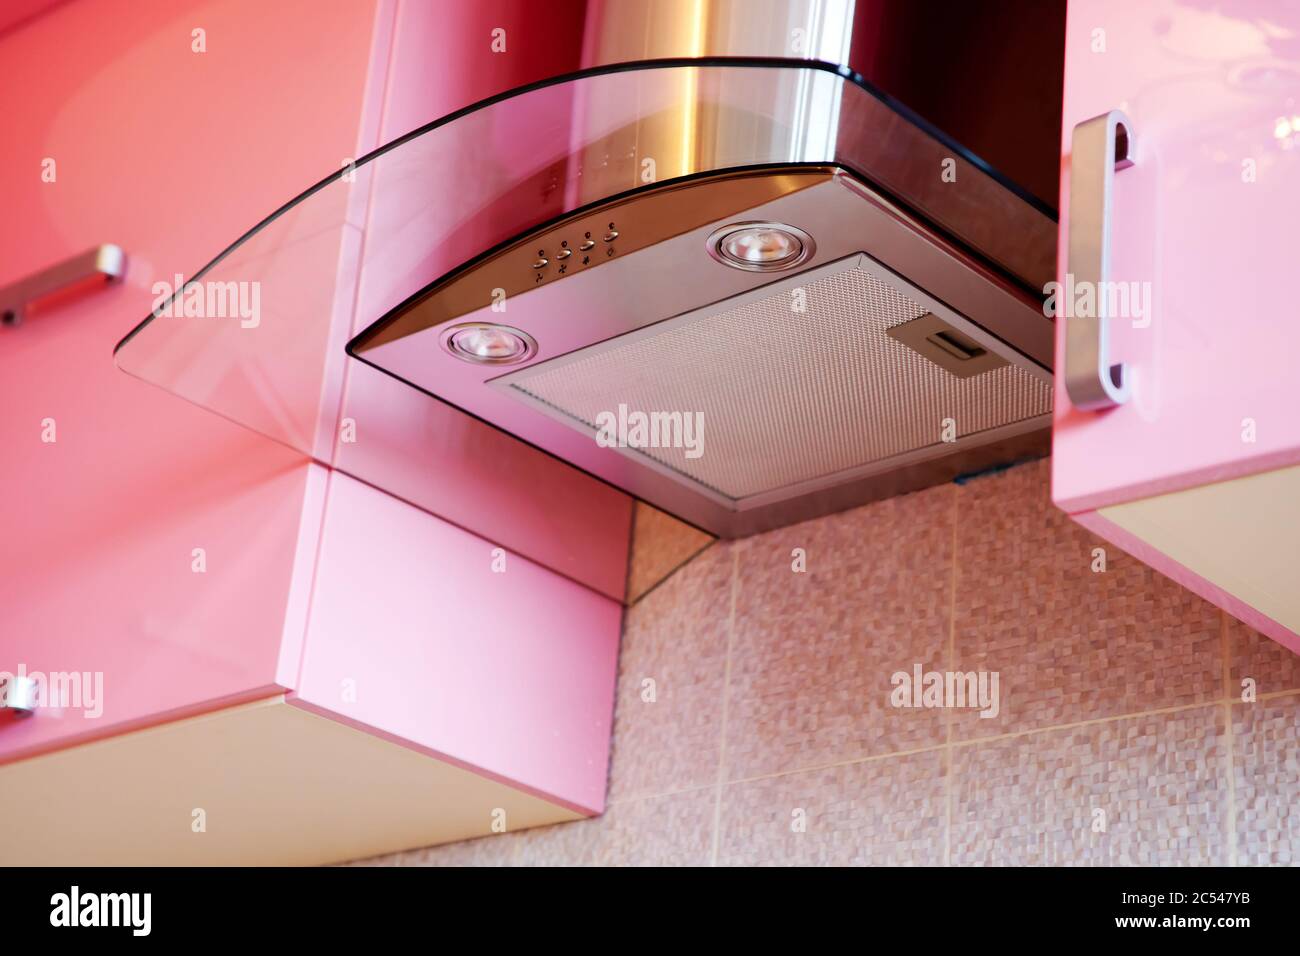 Metallic extractor hood in a pink kitchen. Detail of the modern kitchen interior. Cooker hood with contemporary design. Stock Photo